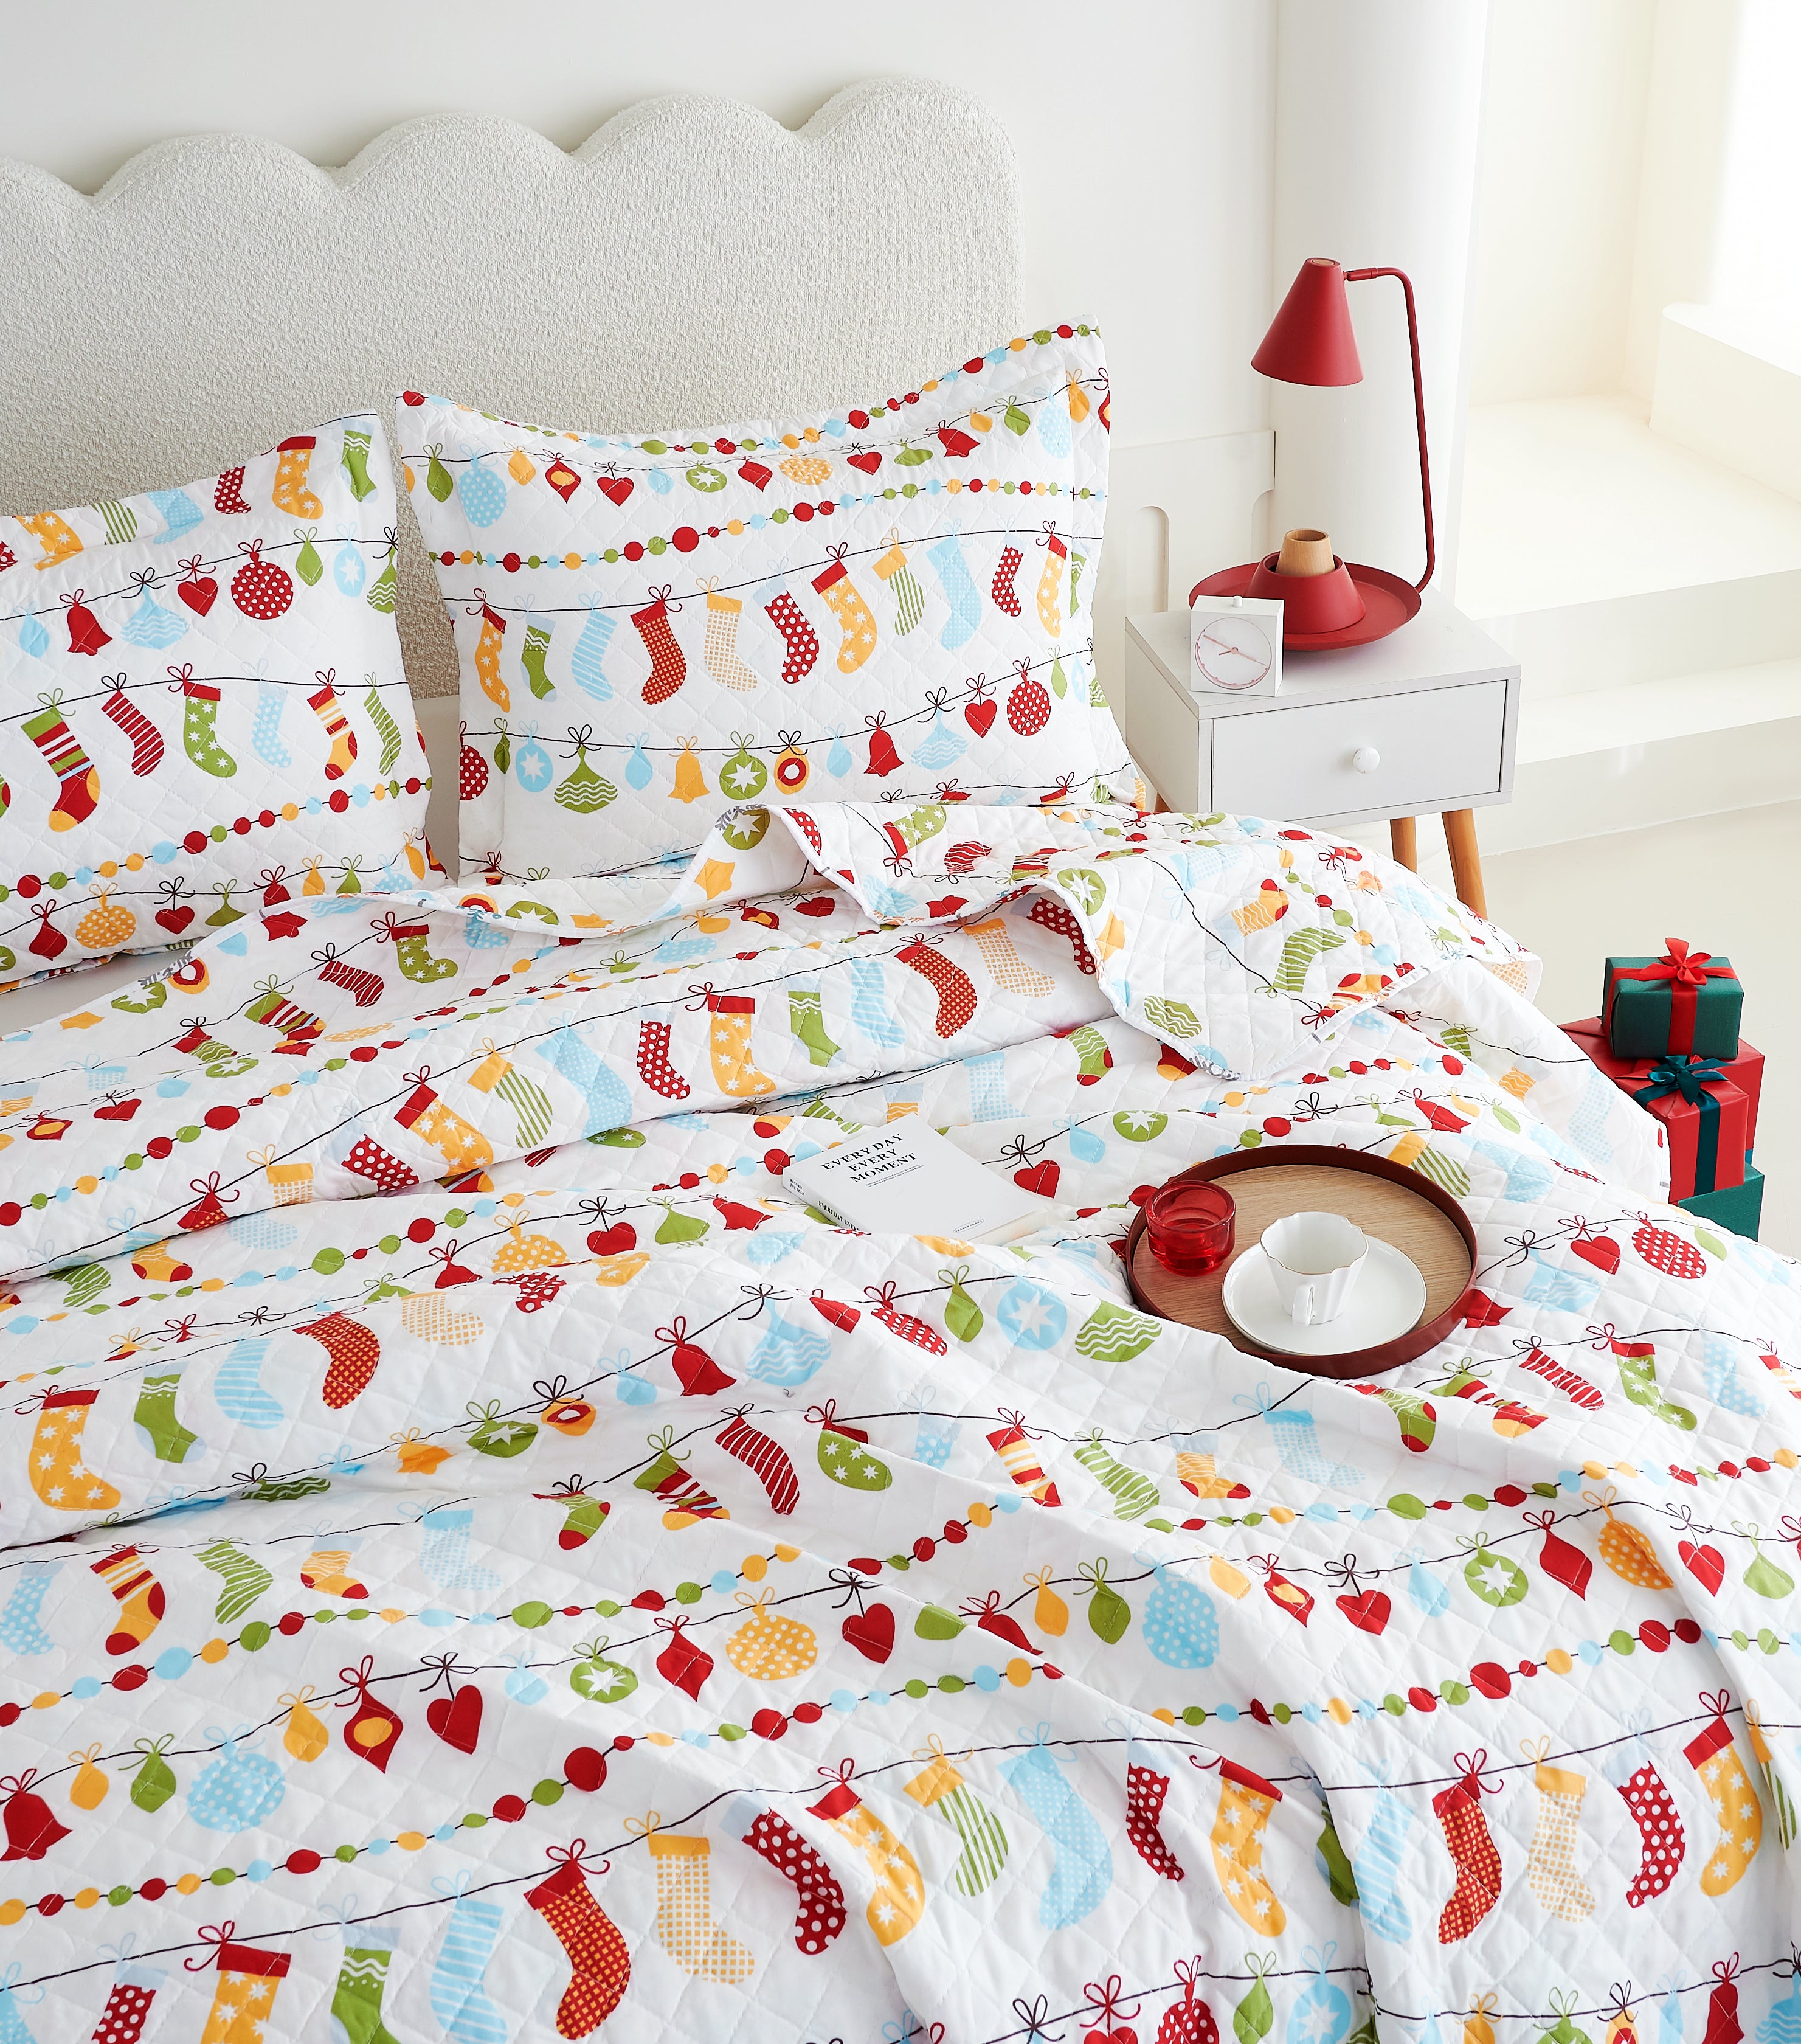 Holiday Collection Quilt Set - Ultra-Soft, Reversible Coverlet Bedding - Oversized Quilt With Matching Pillow Shams - Spirit Linen